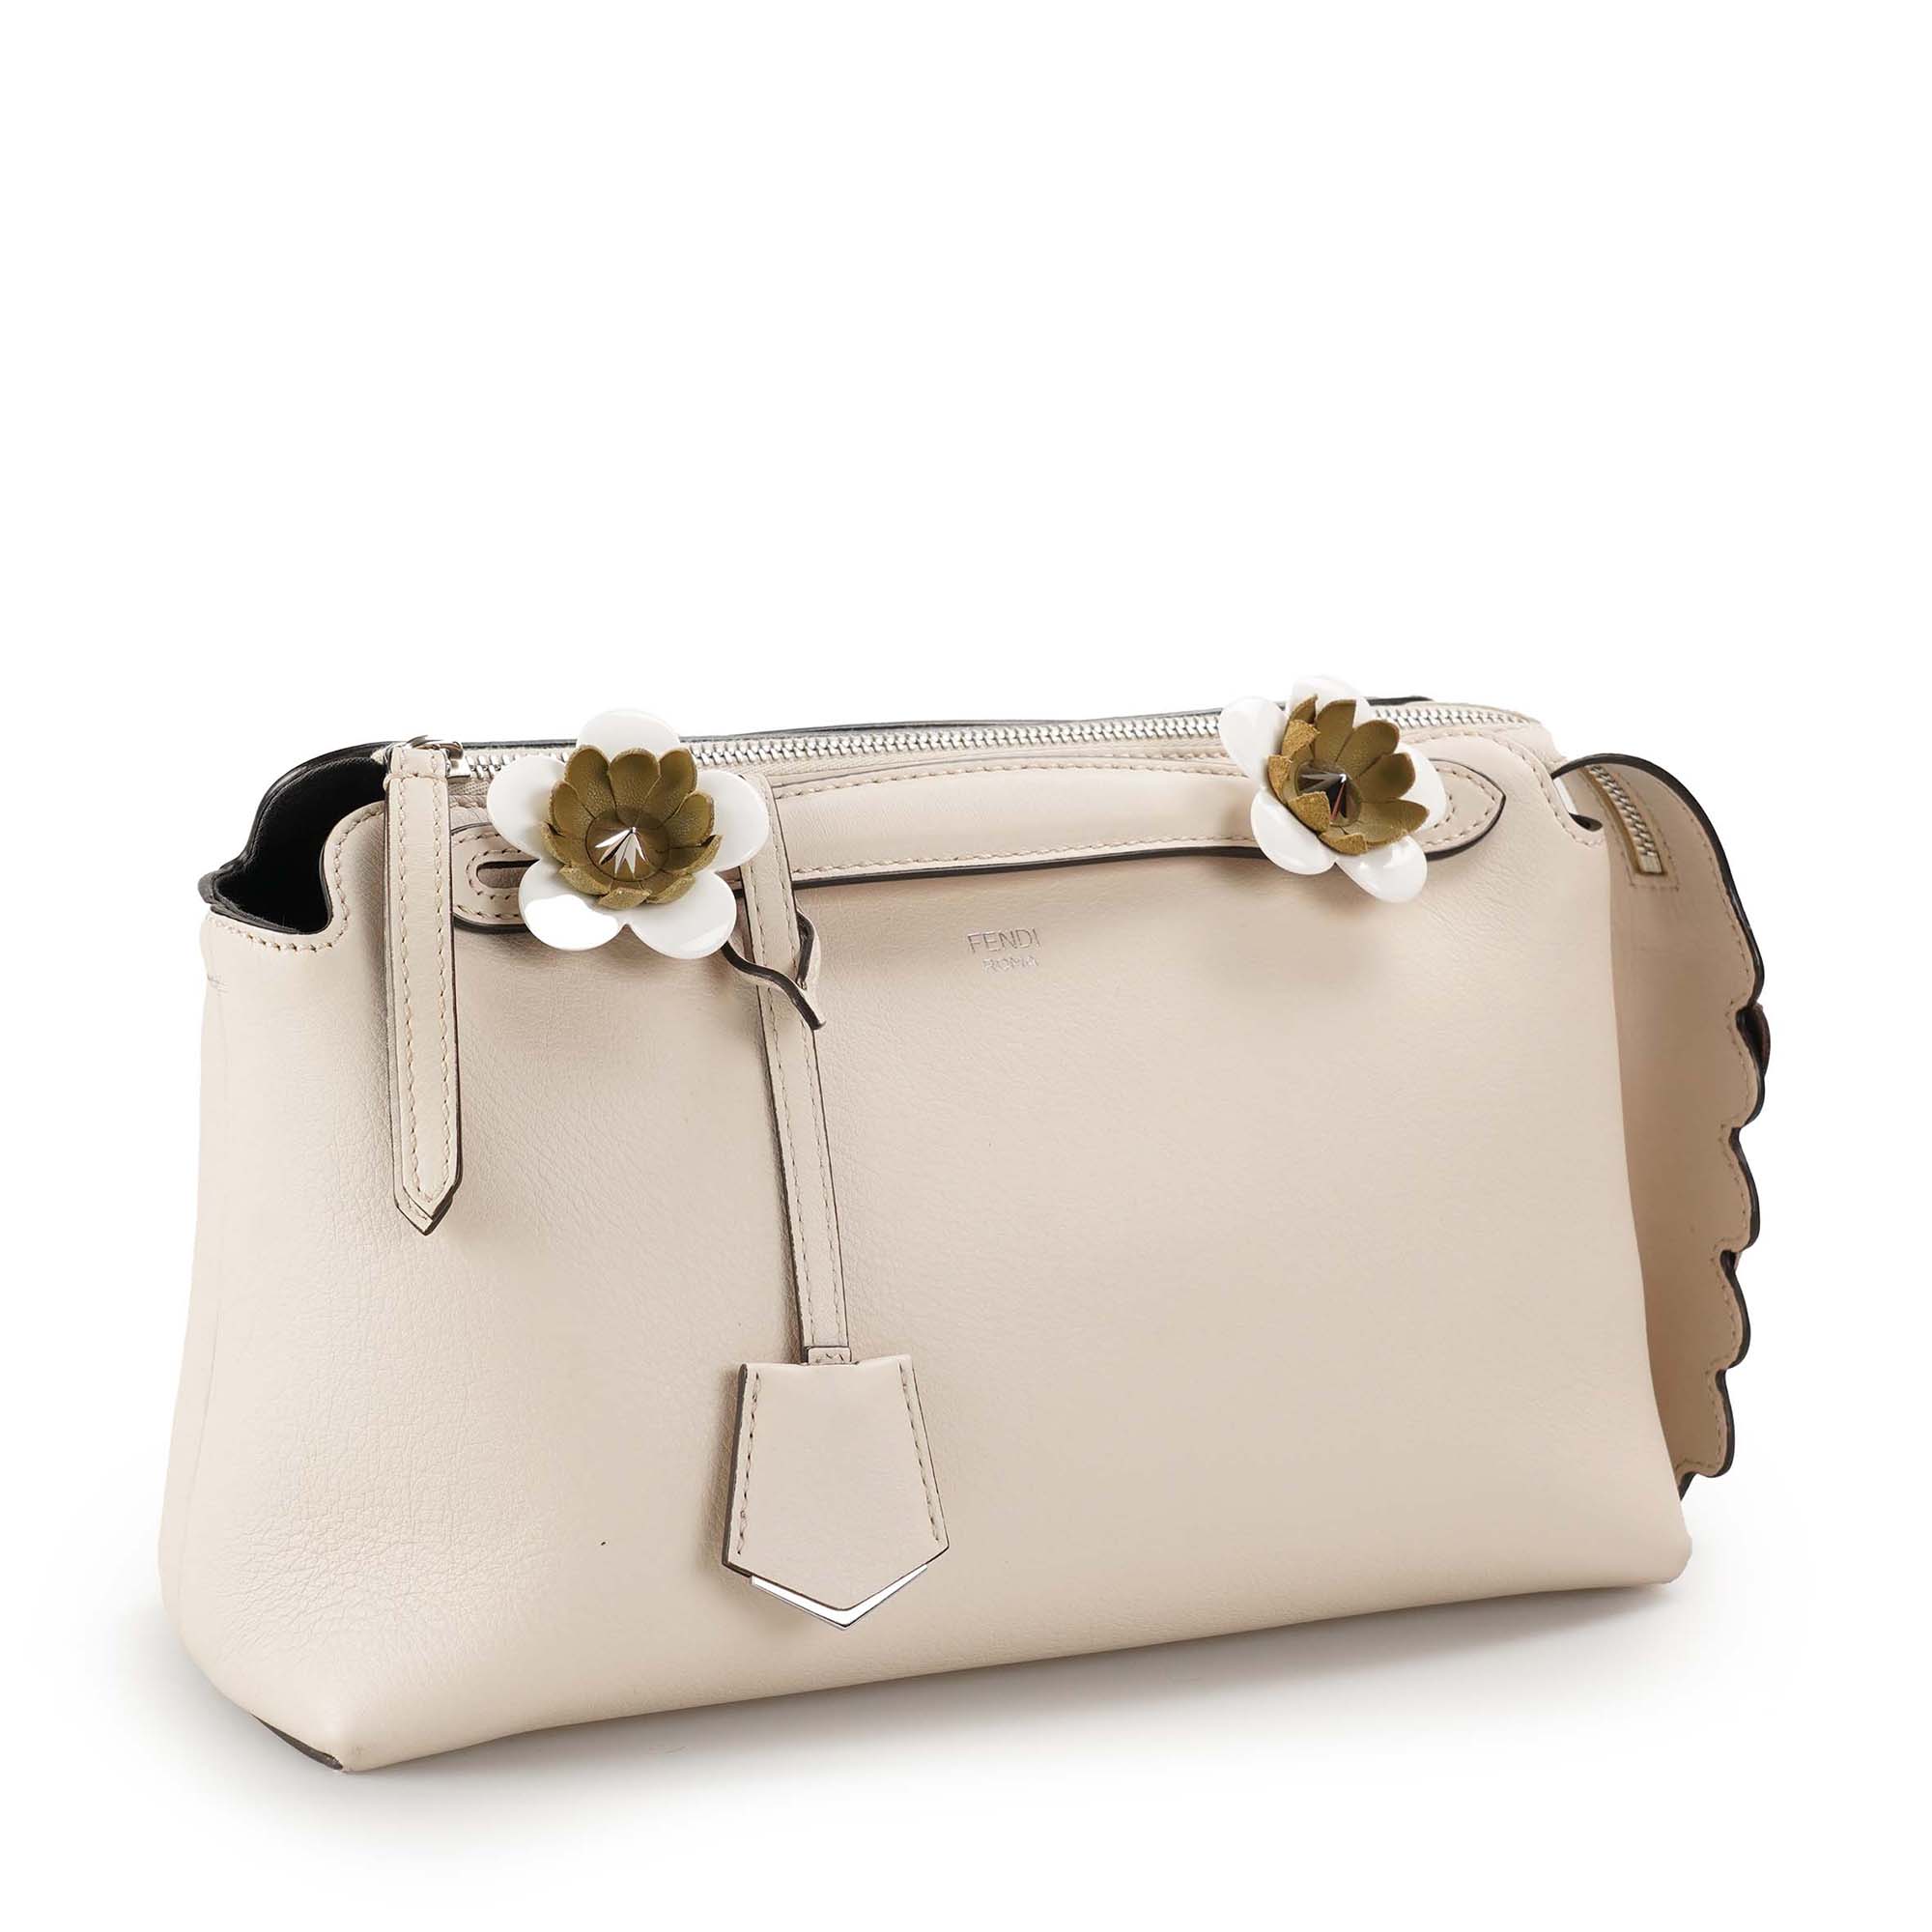 Fendi - Nude Leather Flowerland By The Way Boston Bag 